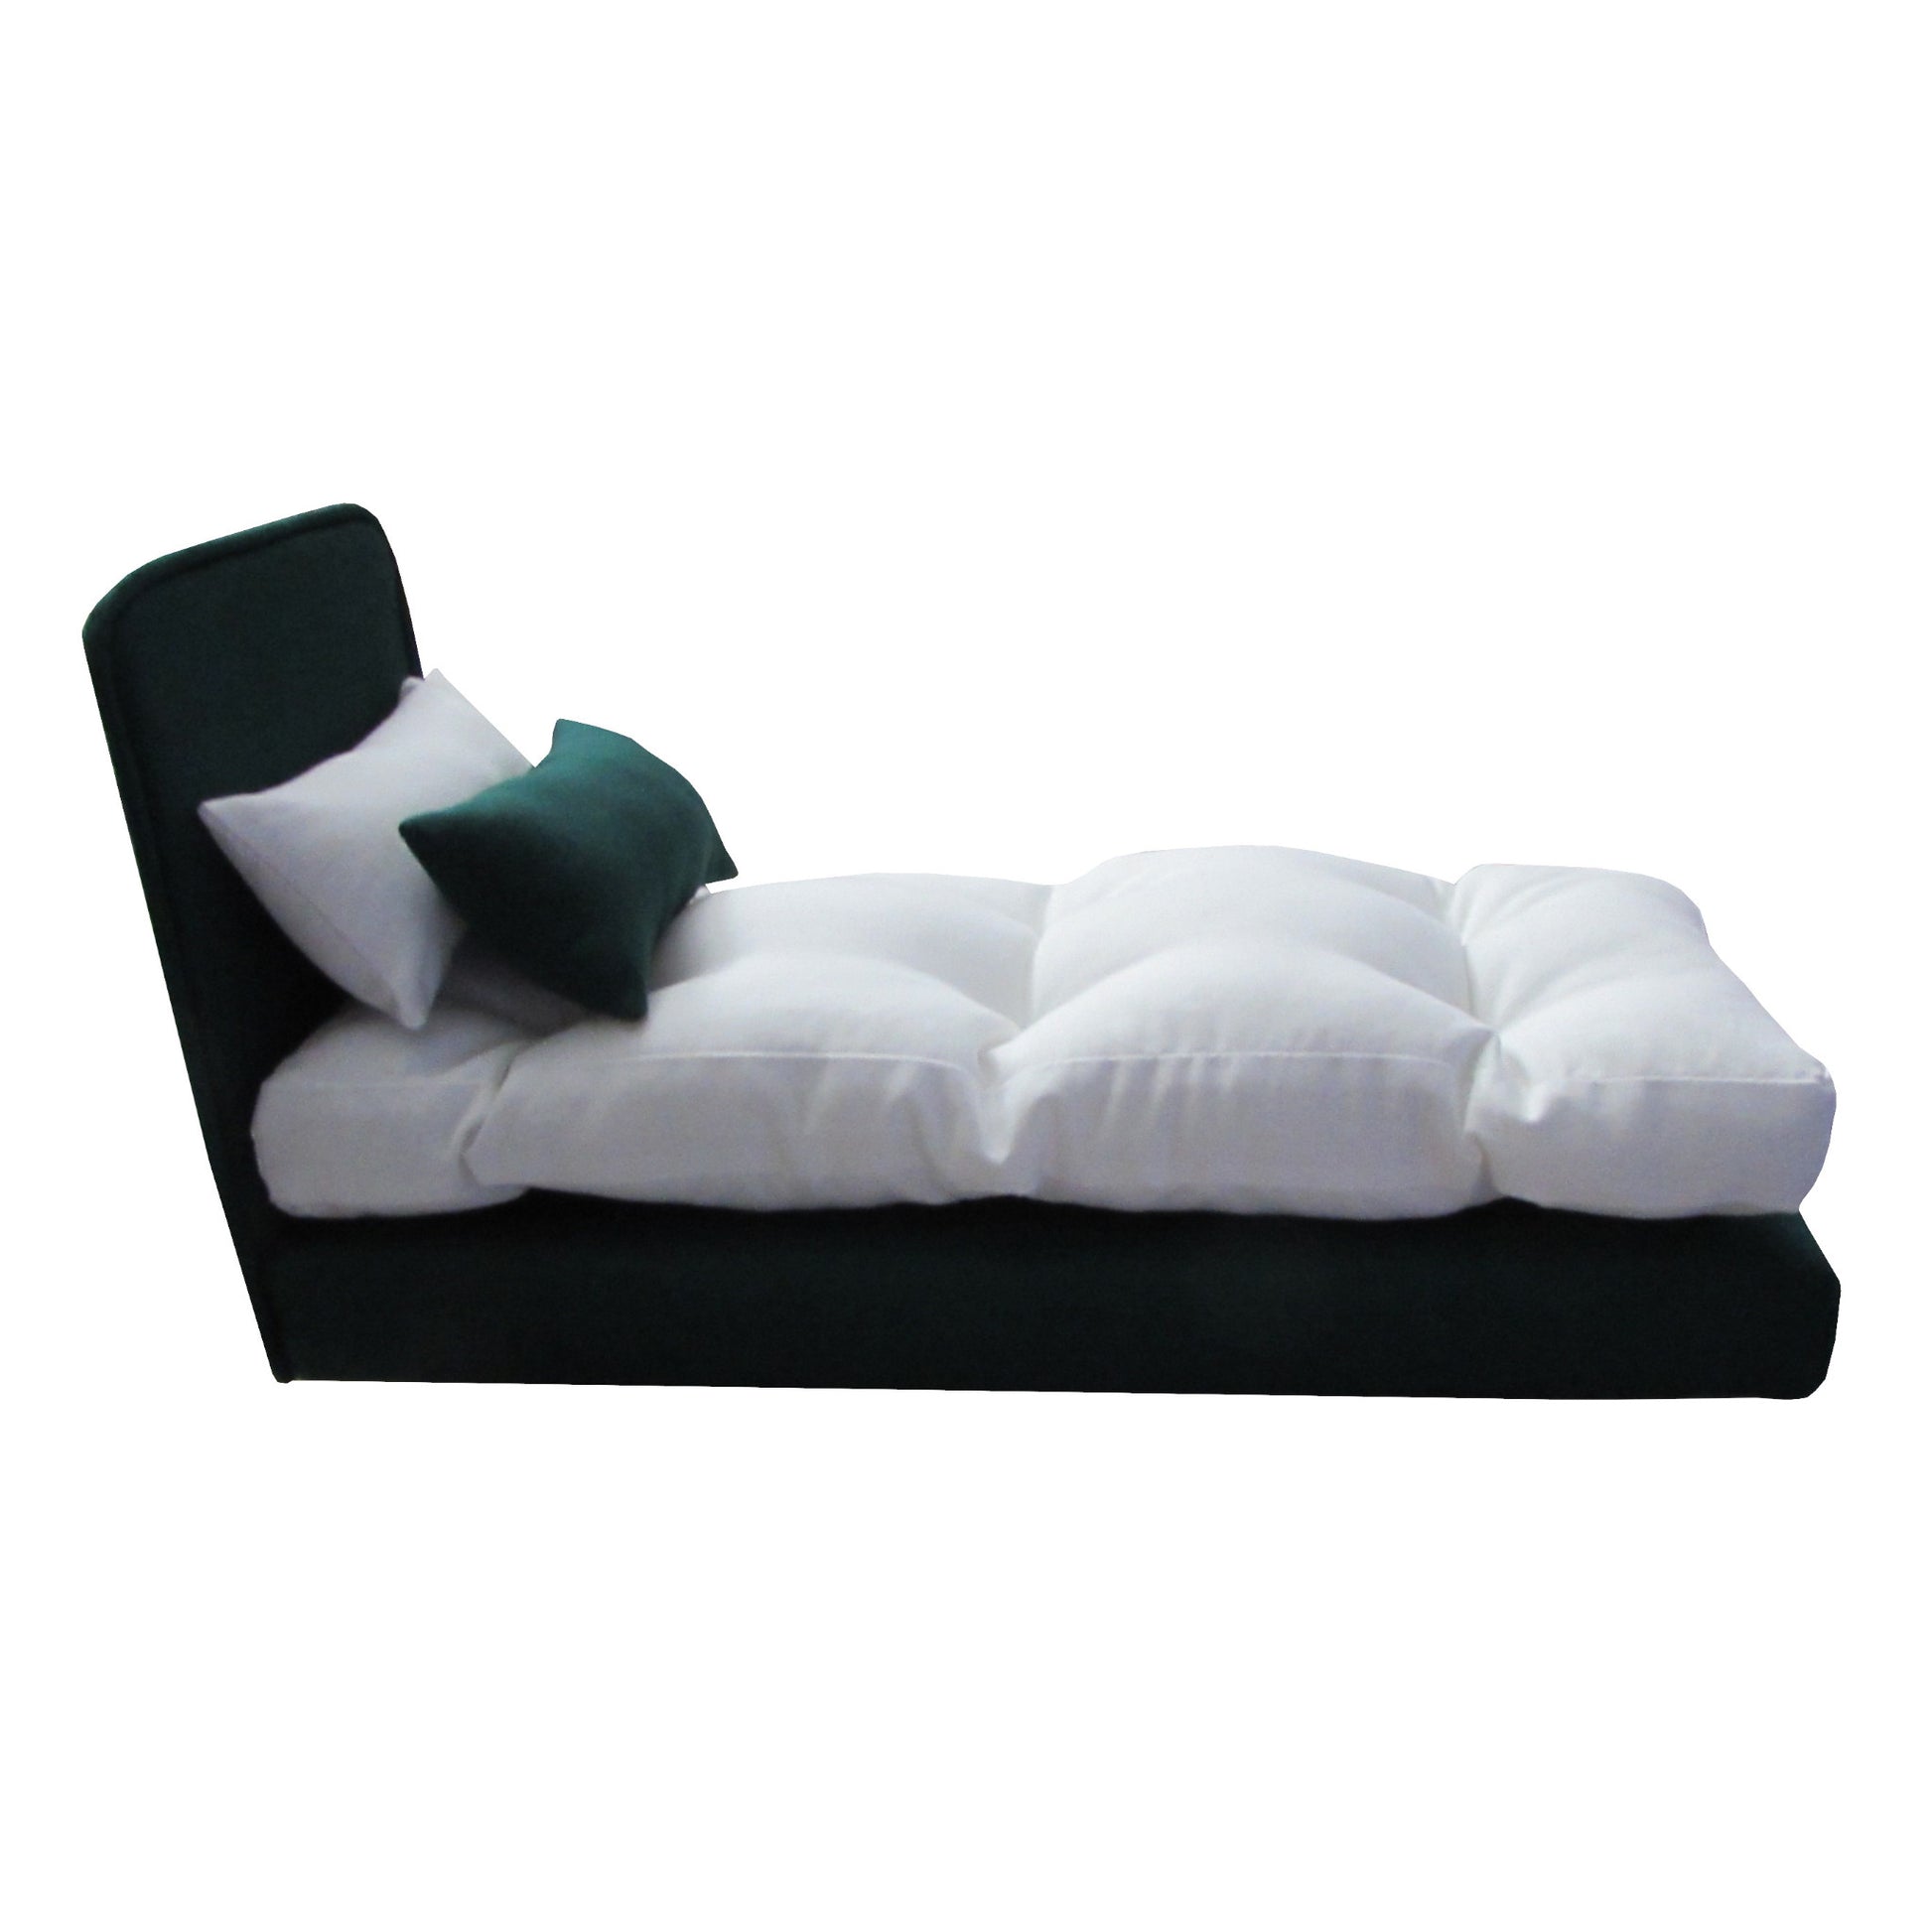 Upholstered Dark Green Doll Bed for 11.5-inch and 12-inch dolls